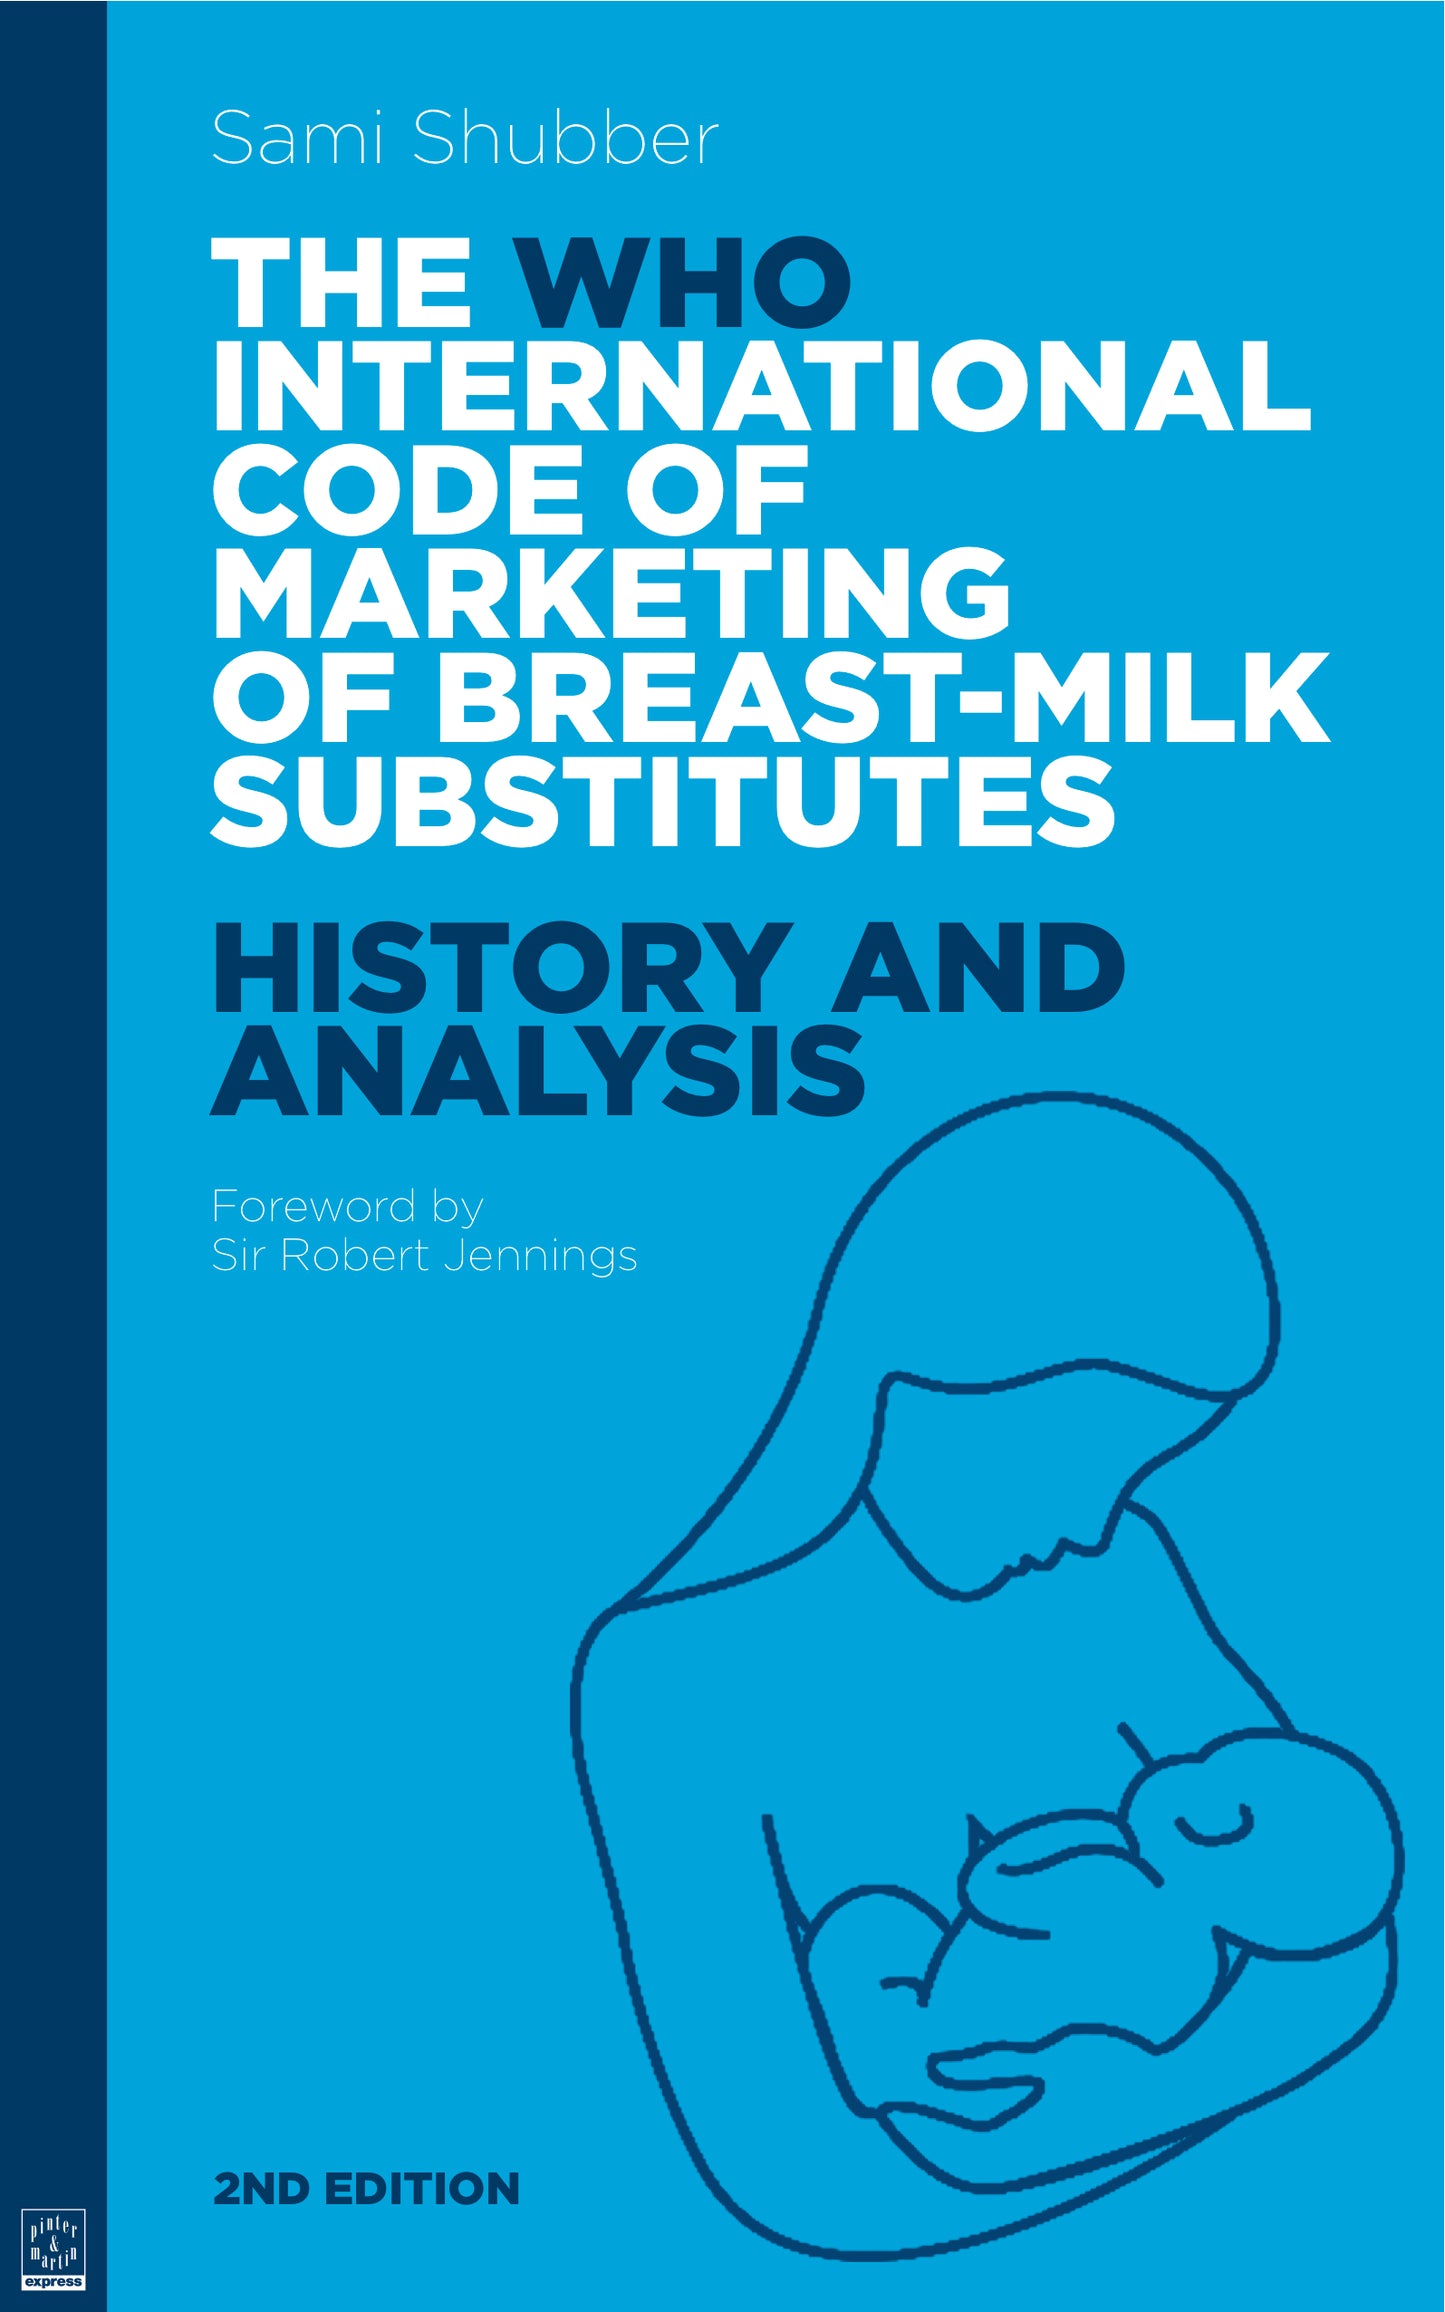 WHO Code of Marketing of Breast-Milk Substitutes: History and Analysis